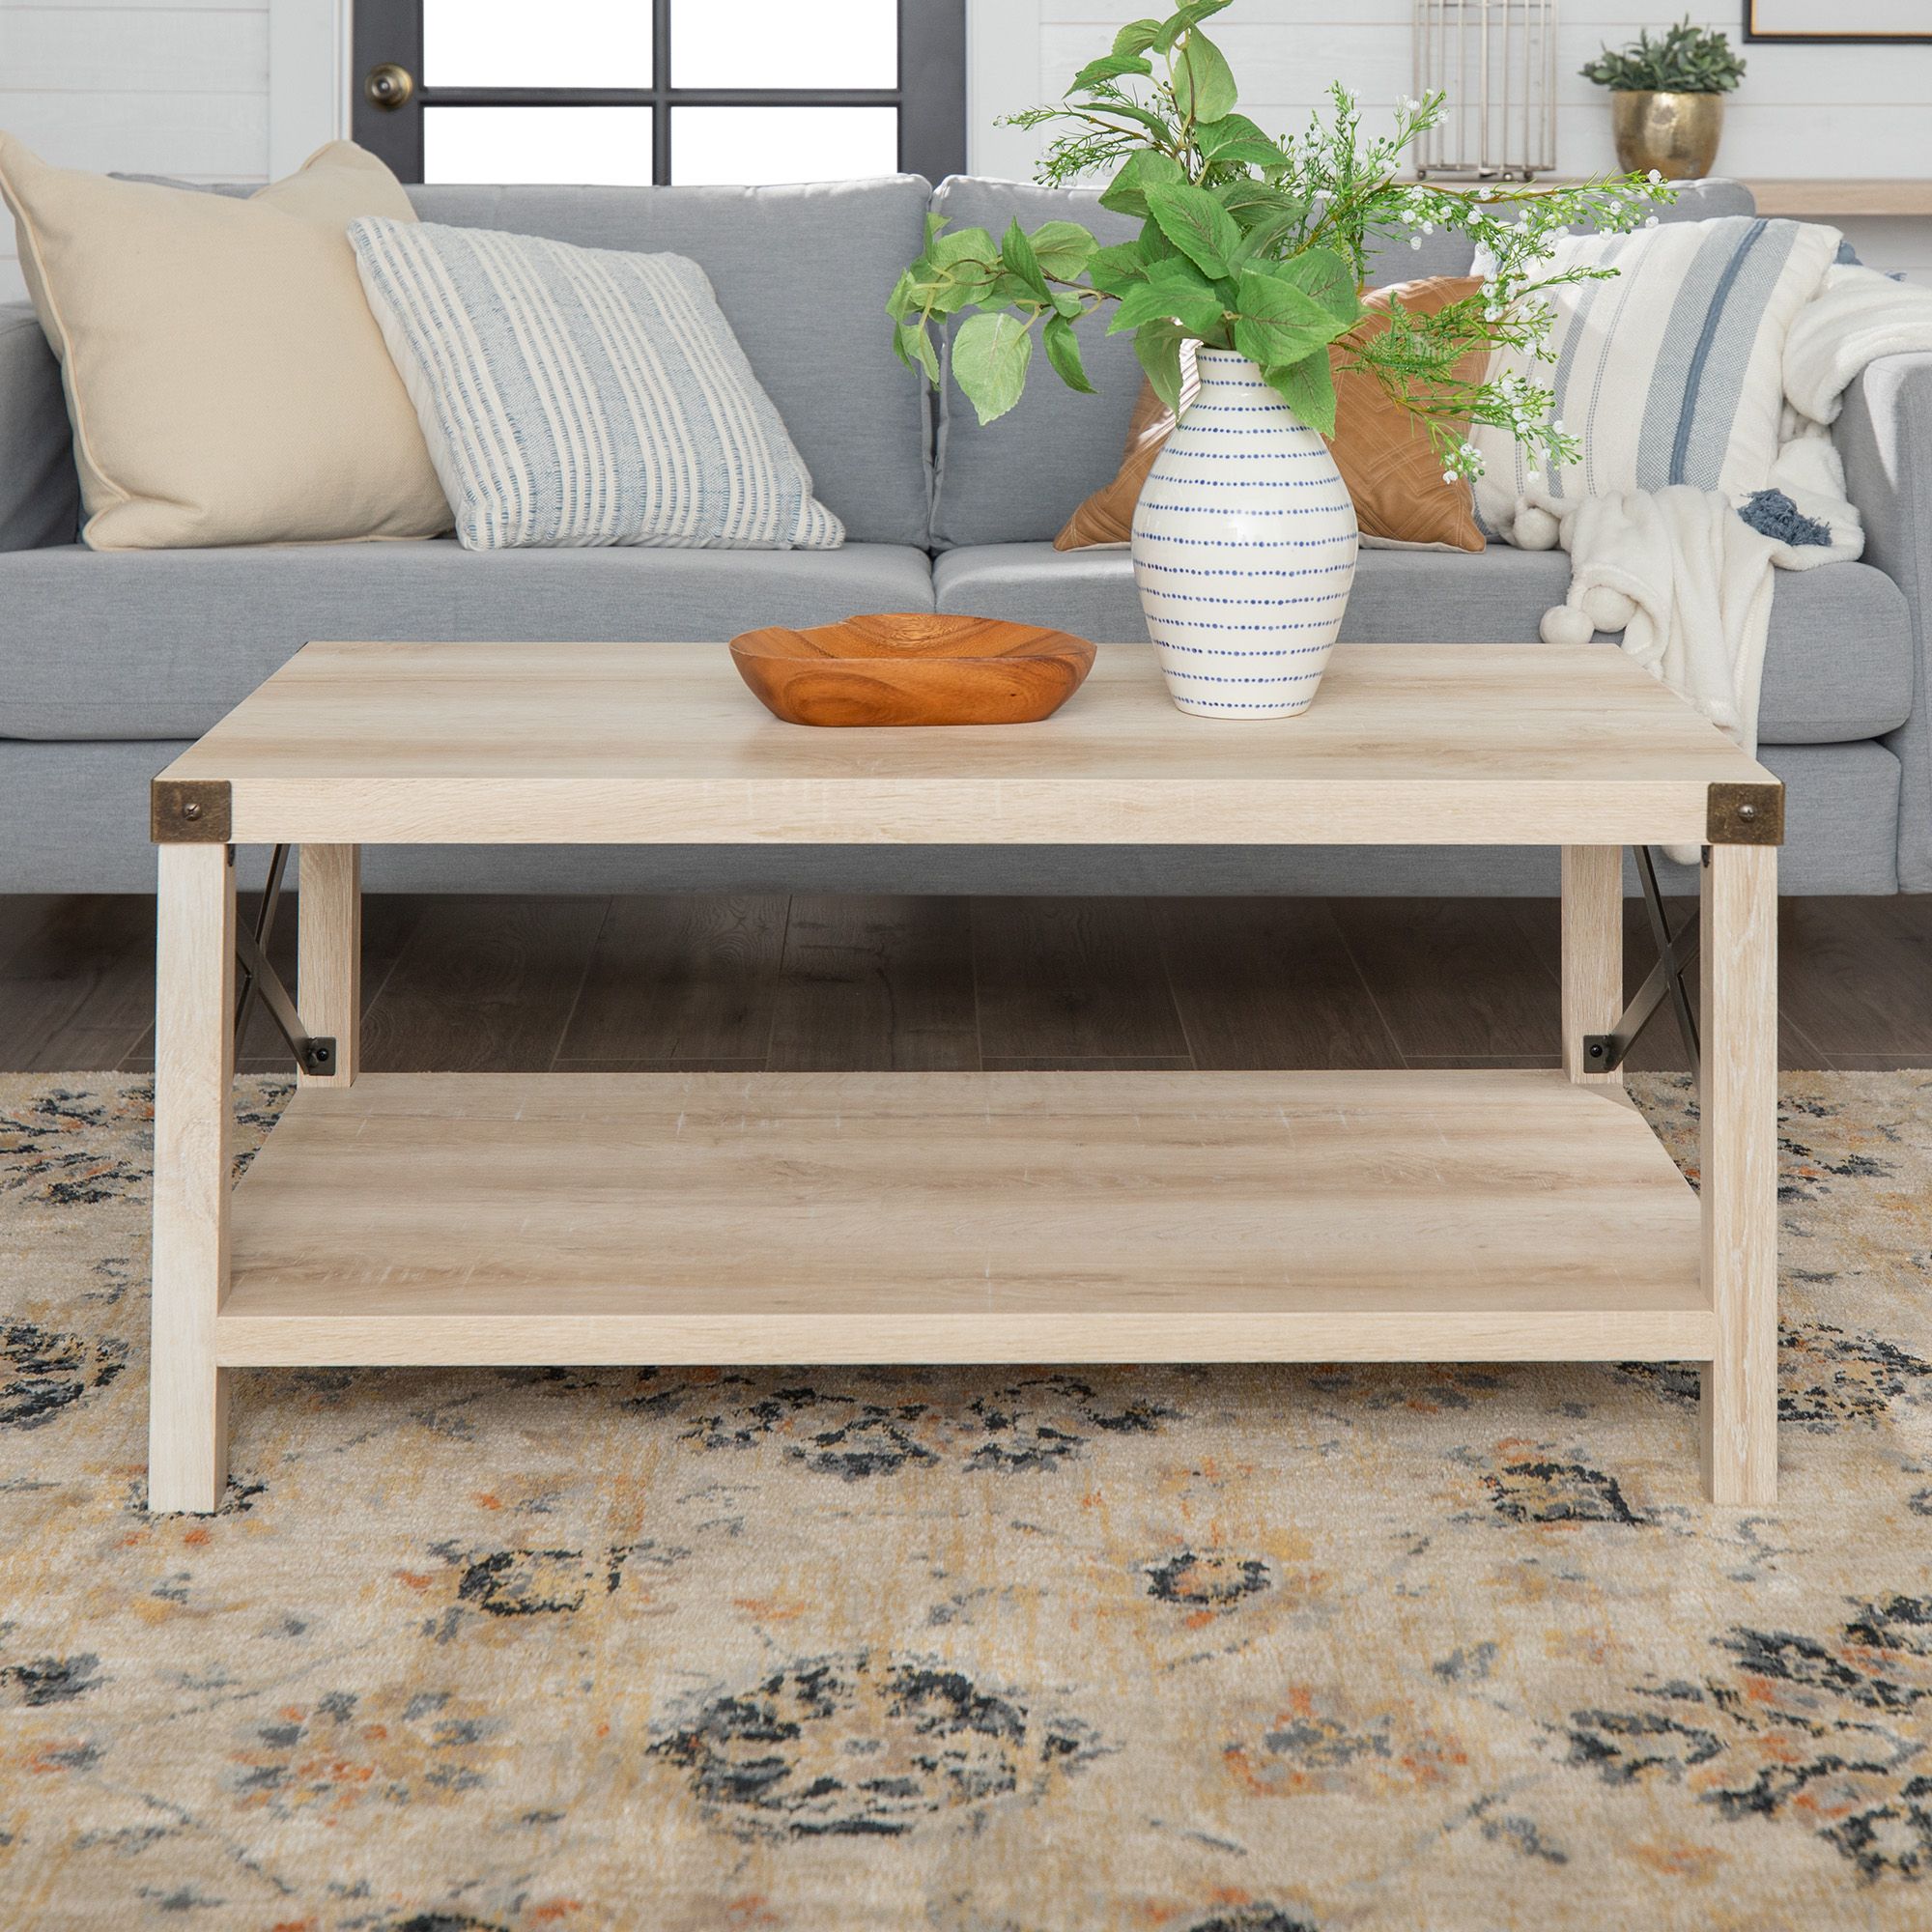 Manor Park 3 Piece Rustic Wood & Metal Coffee Table Set Within Latest Oak Wood And Metal Legs Coffee Tables (View 11 of 20)